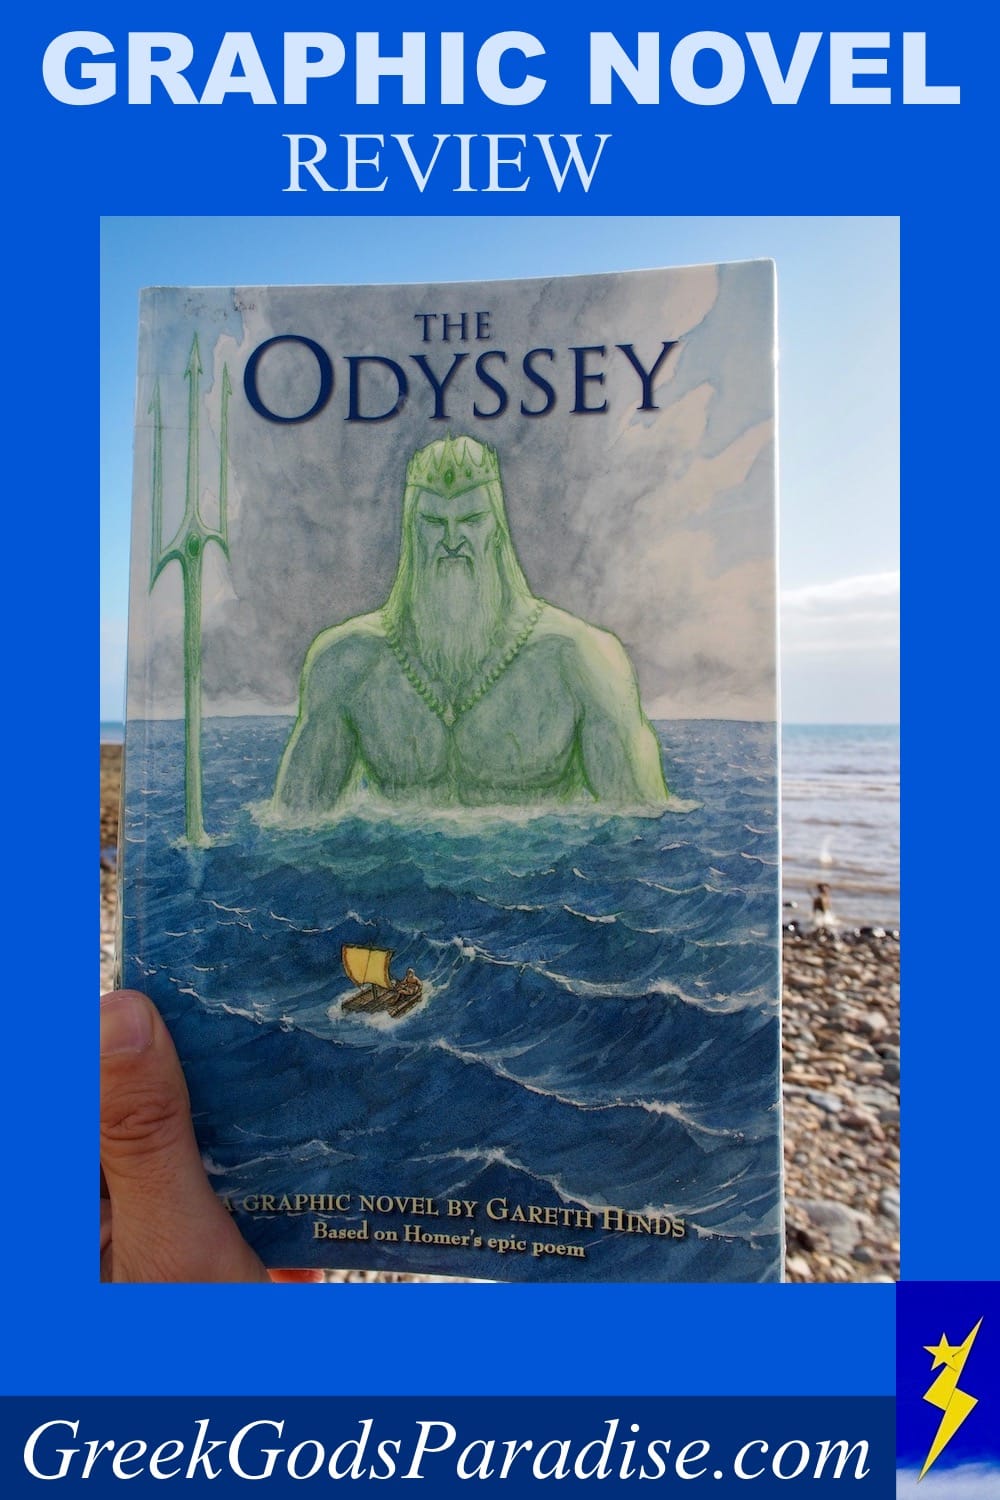 Review The Odyssey by Gareth Hinds